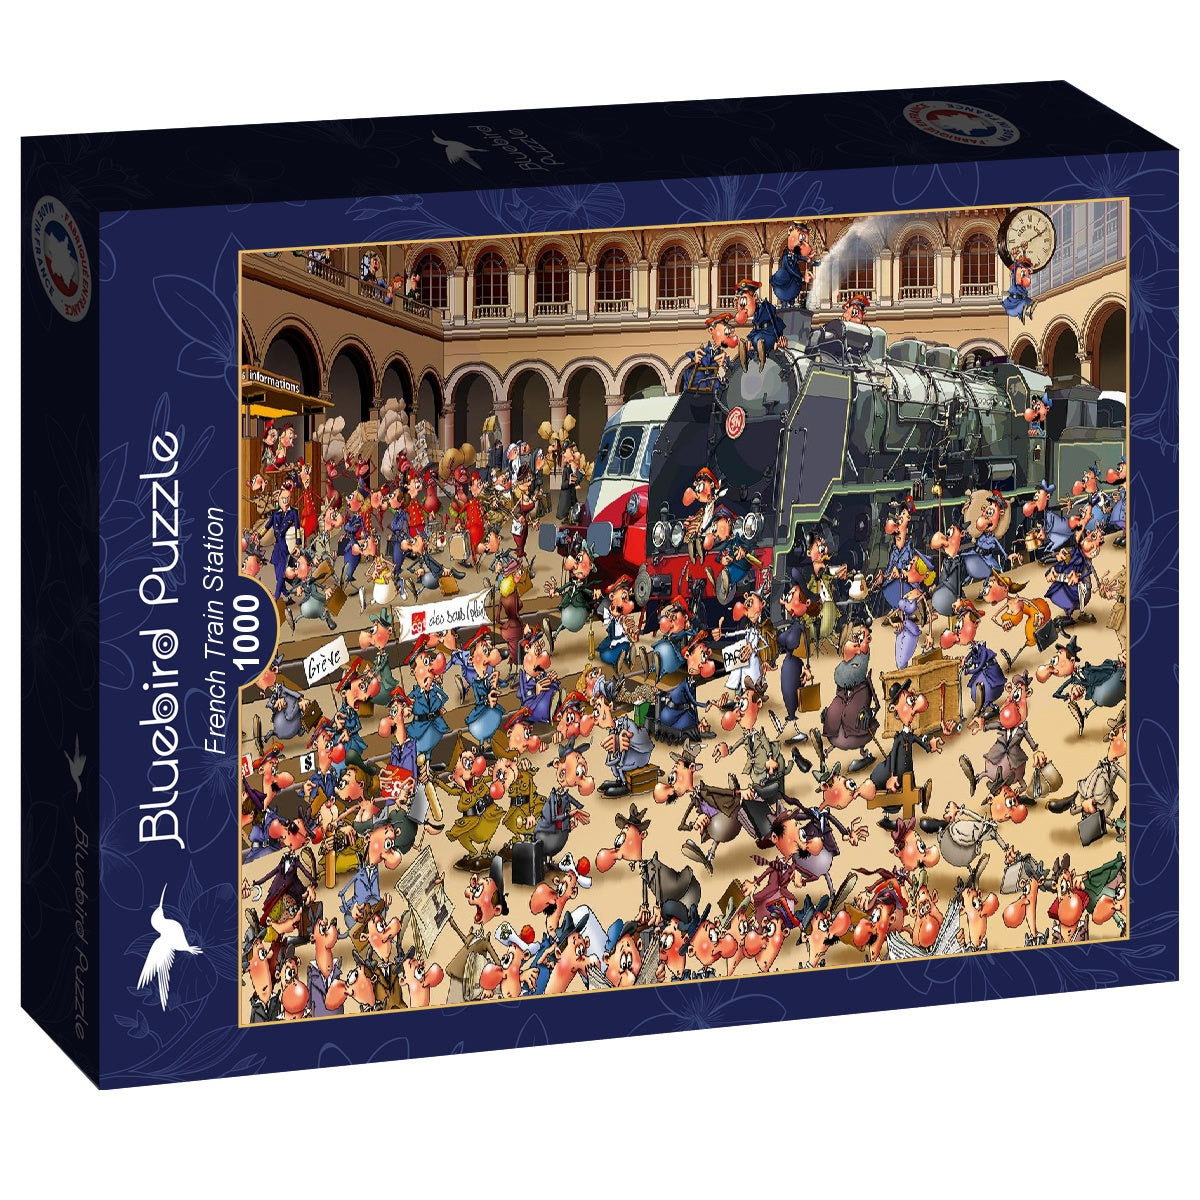 Bluebird Puzzle - French Train Station  - 1000 Piece Jigsaw Puzzle